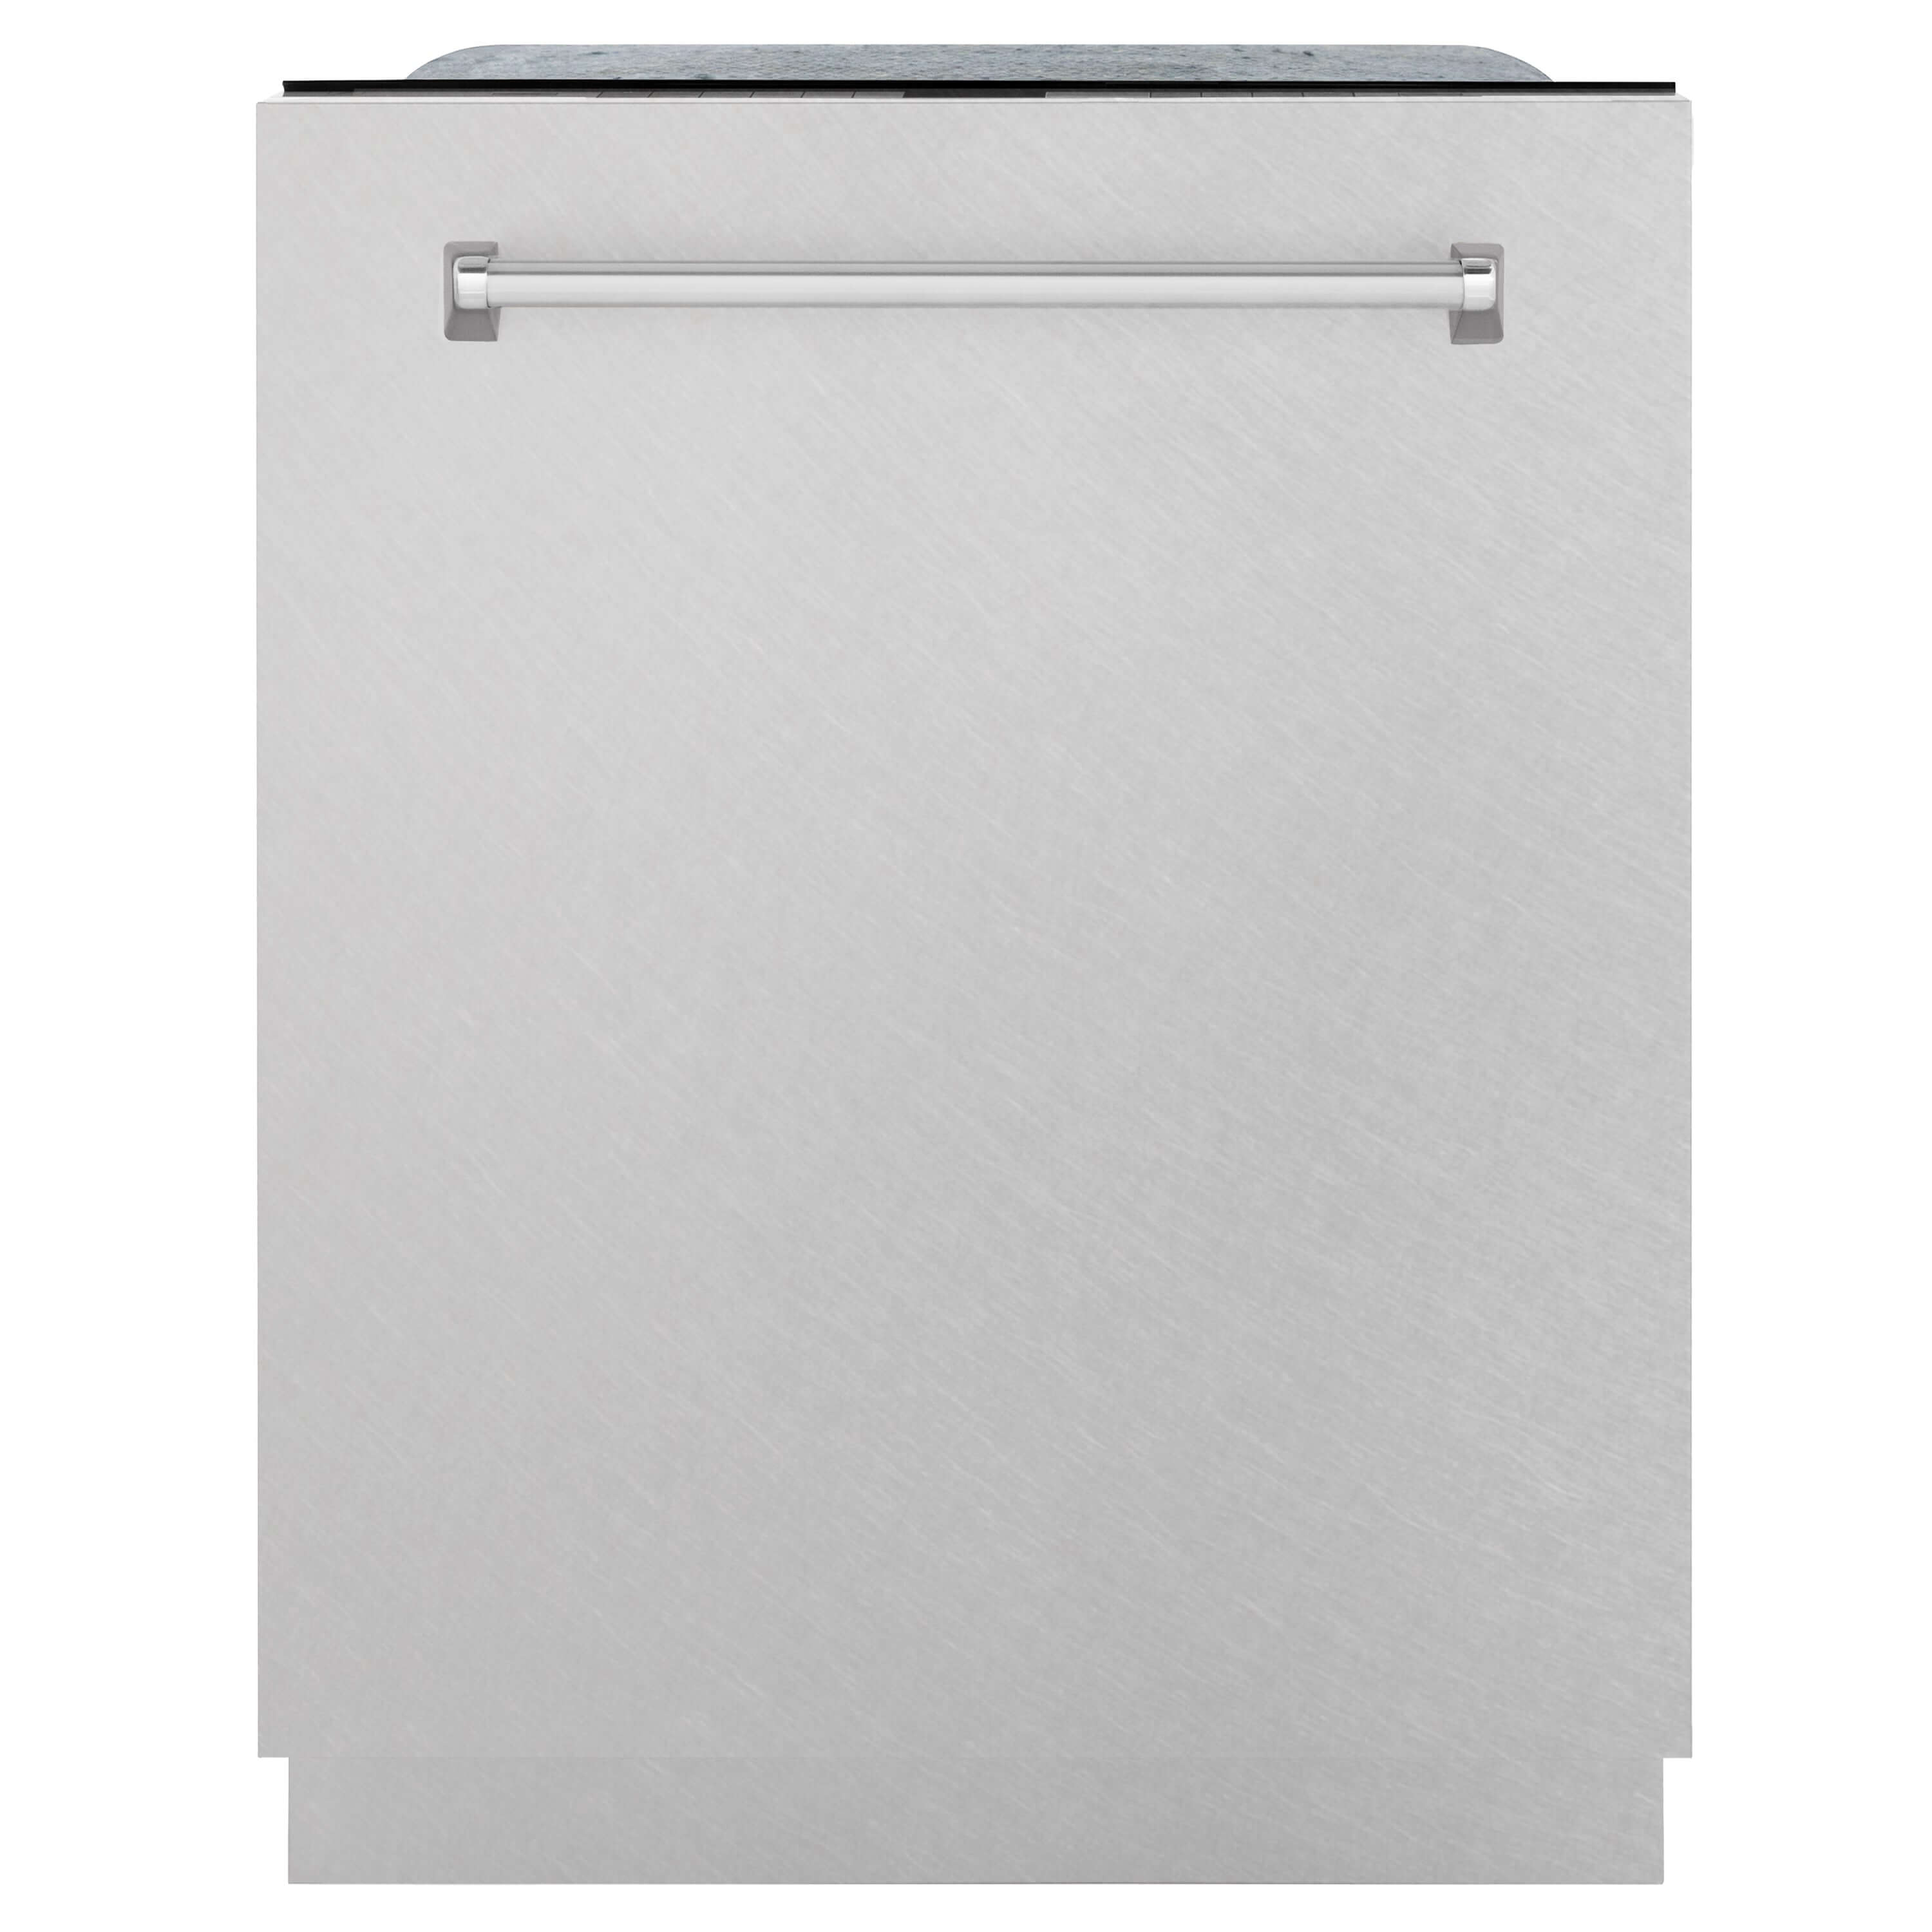 ZLINE 24 in. Monument Series 3rd Rack Top Touch Control Dishwasher in  Fingerprint Resistant Stainless Steel with Stainless Steel Tub, 45dBa 